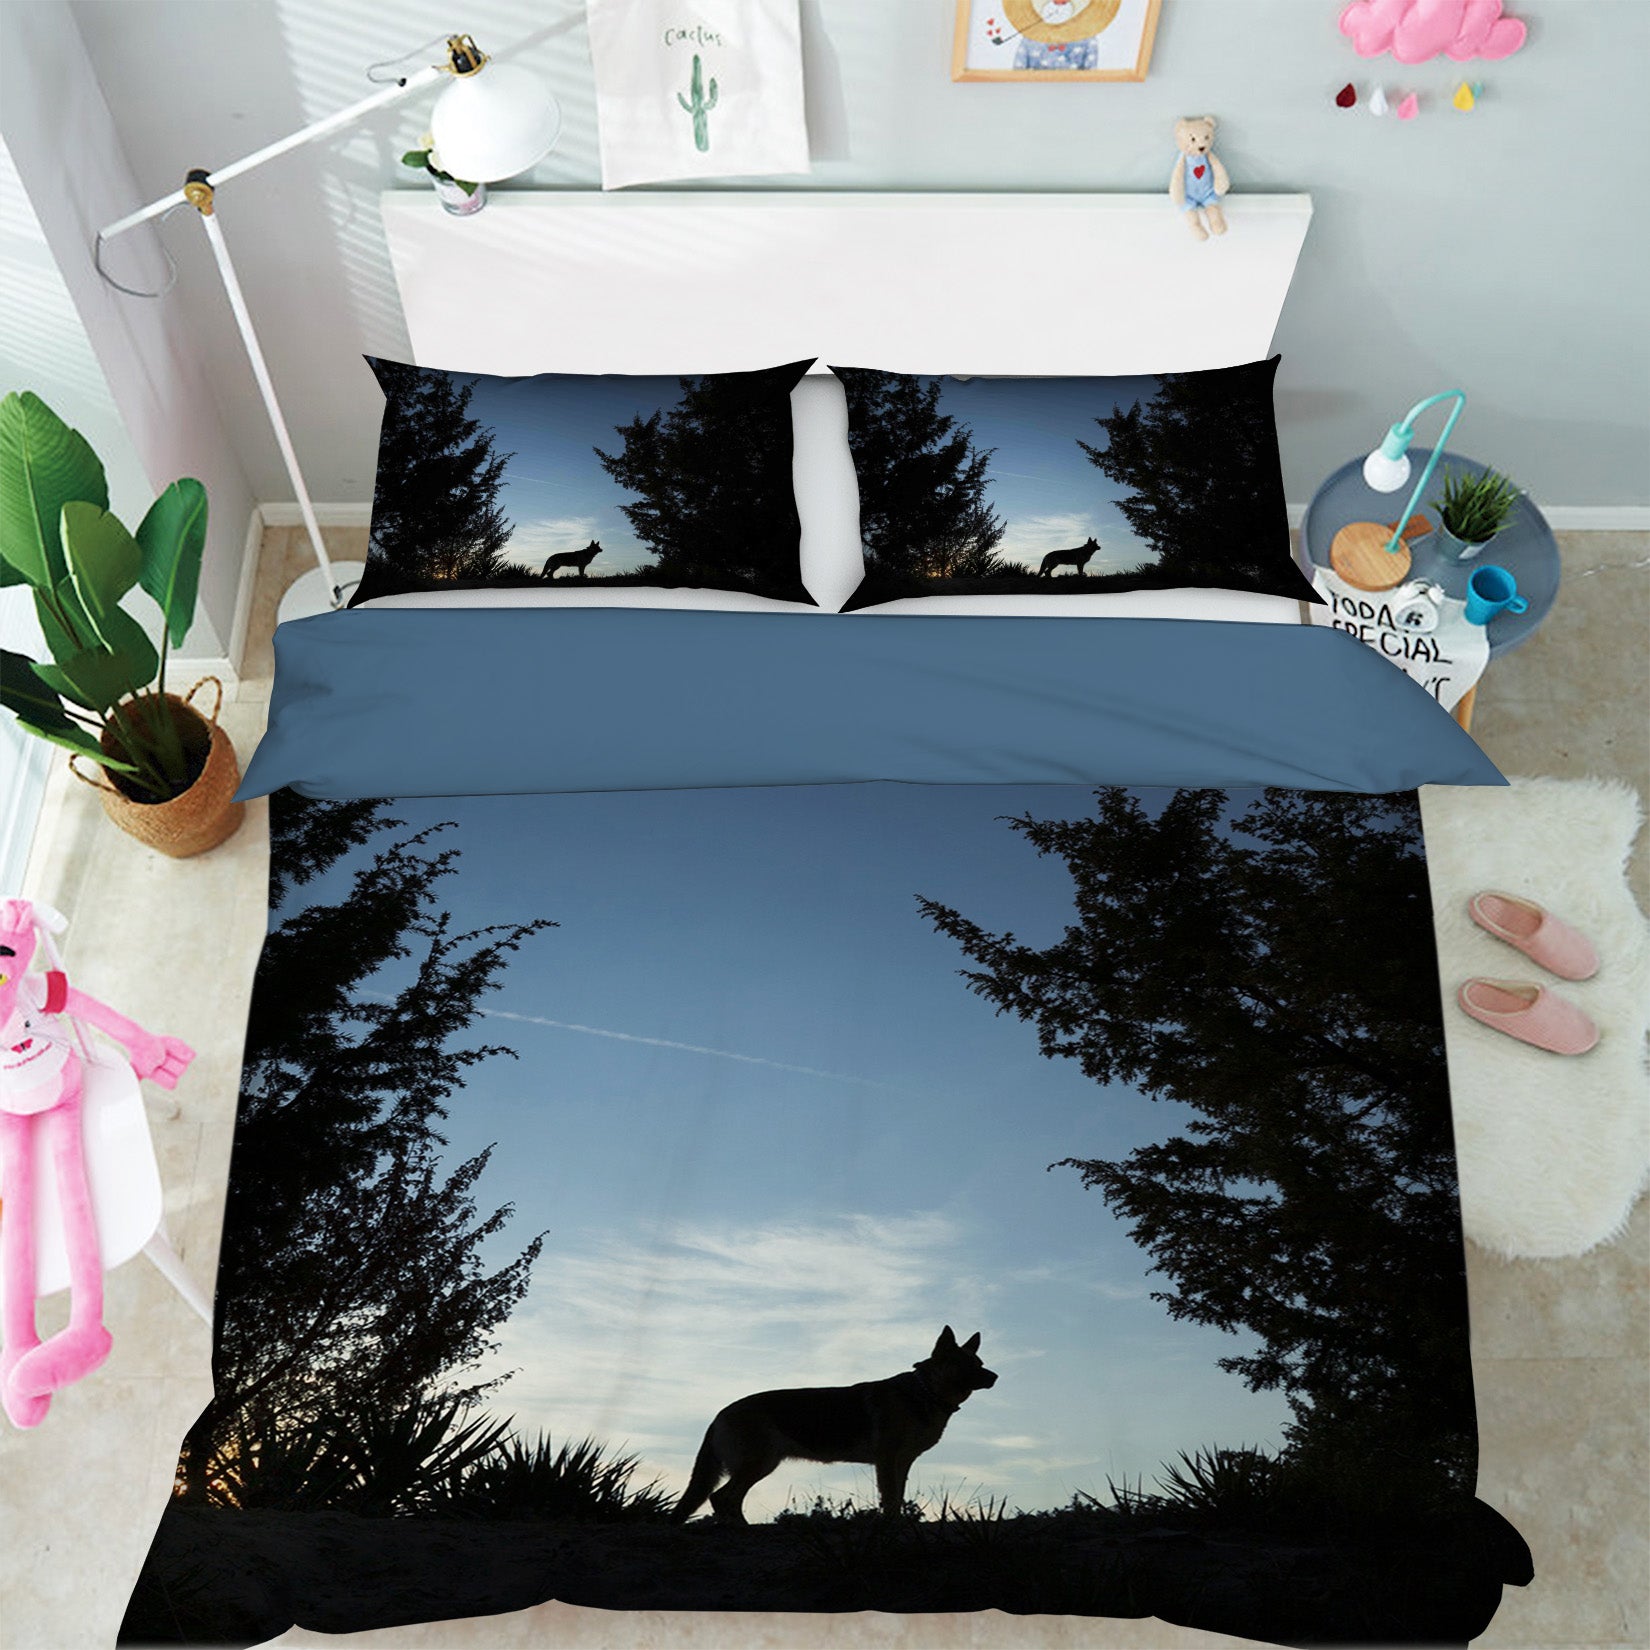 3D Forest Black Wolf 052 Bed Pillowcases Quilt